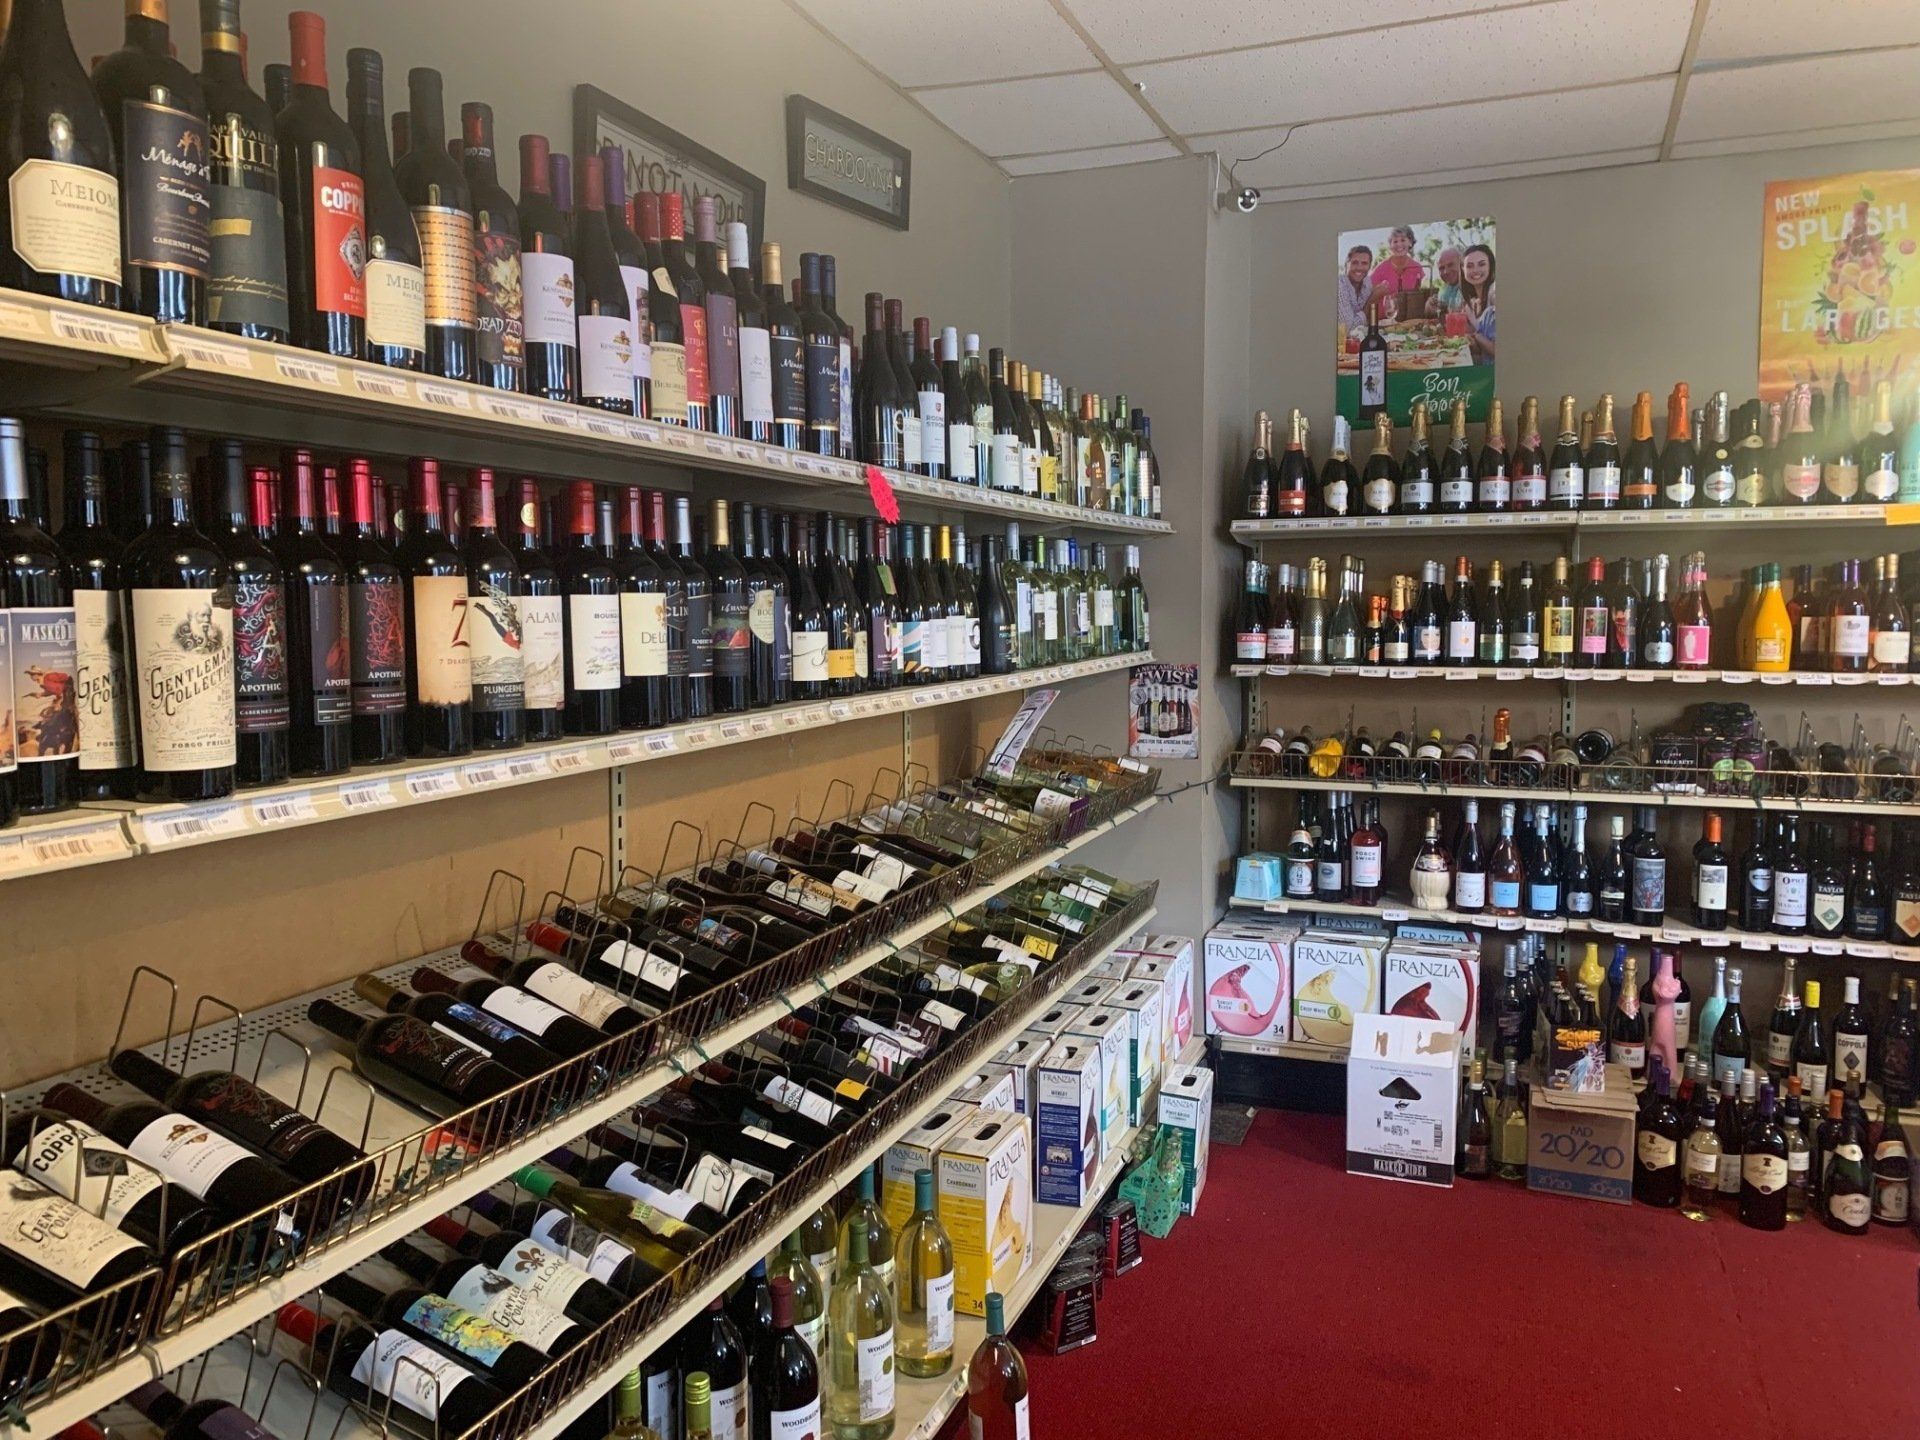 A liquor store filled with lots of wine bottles on shelves.